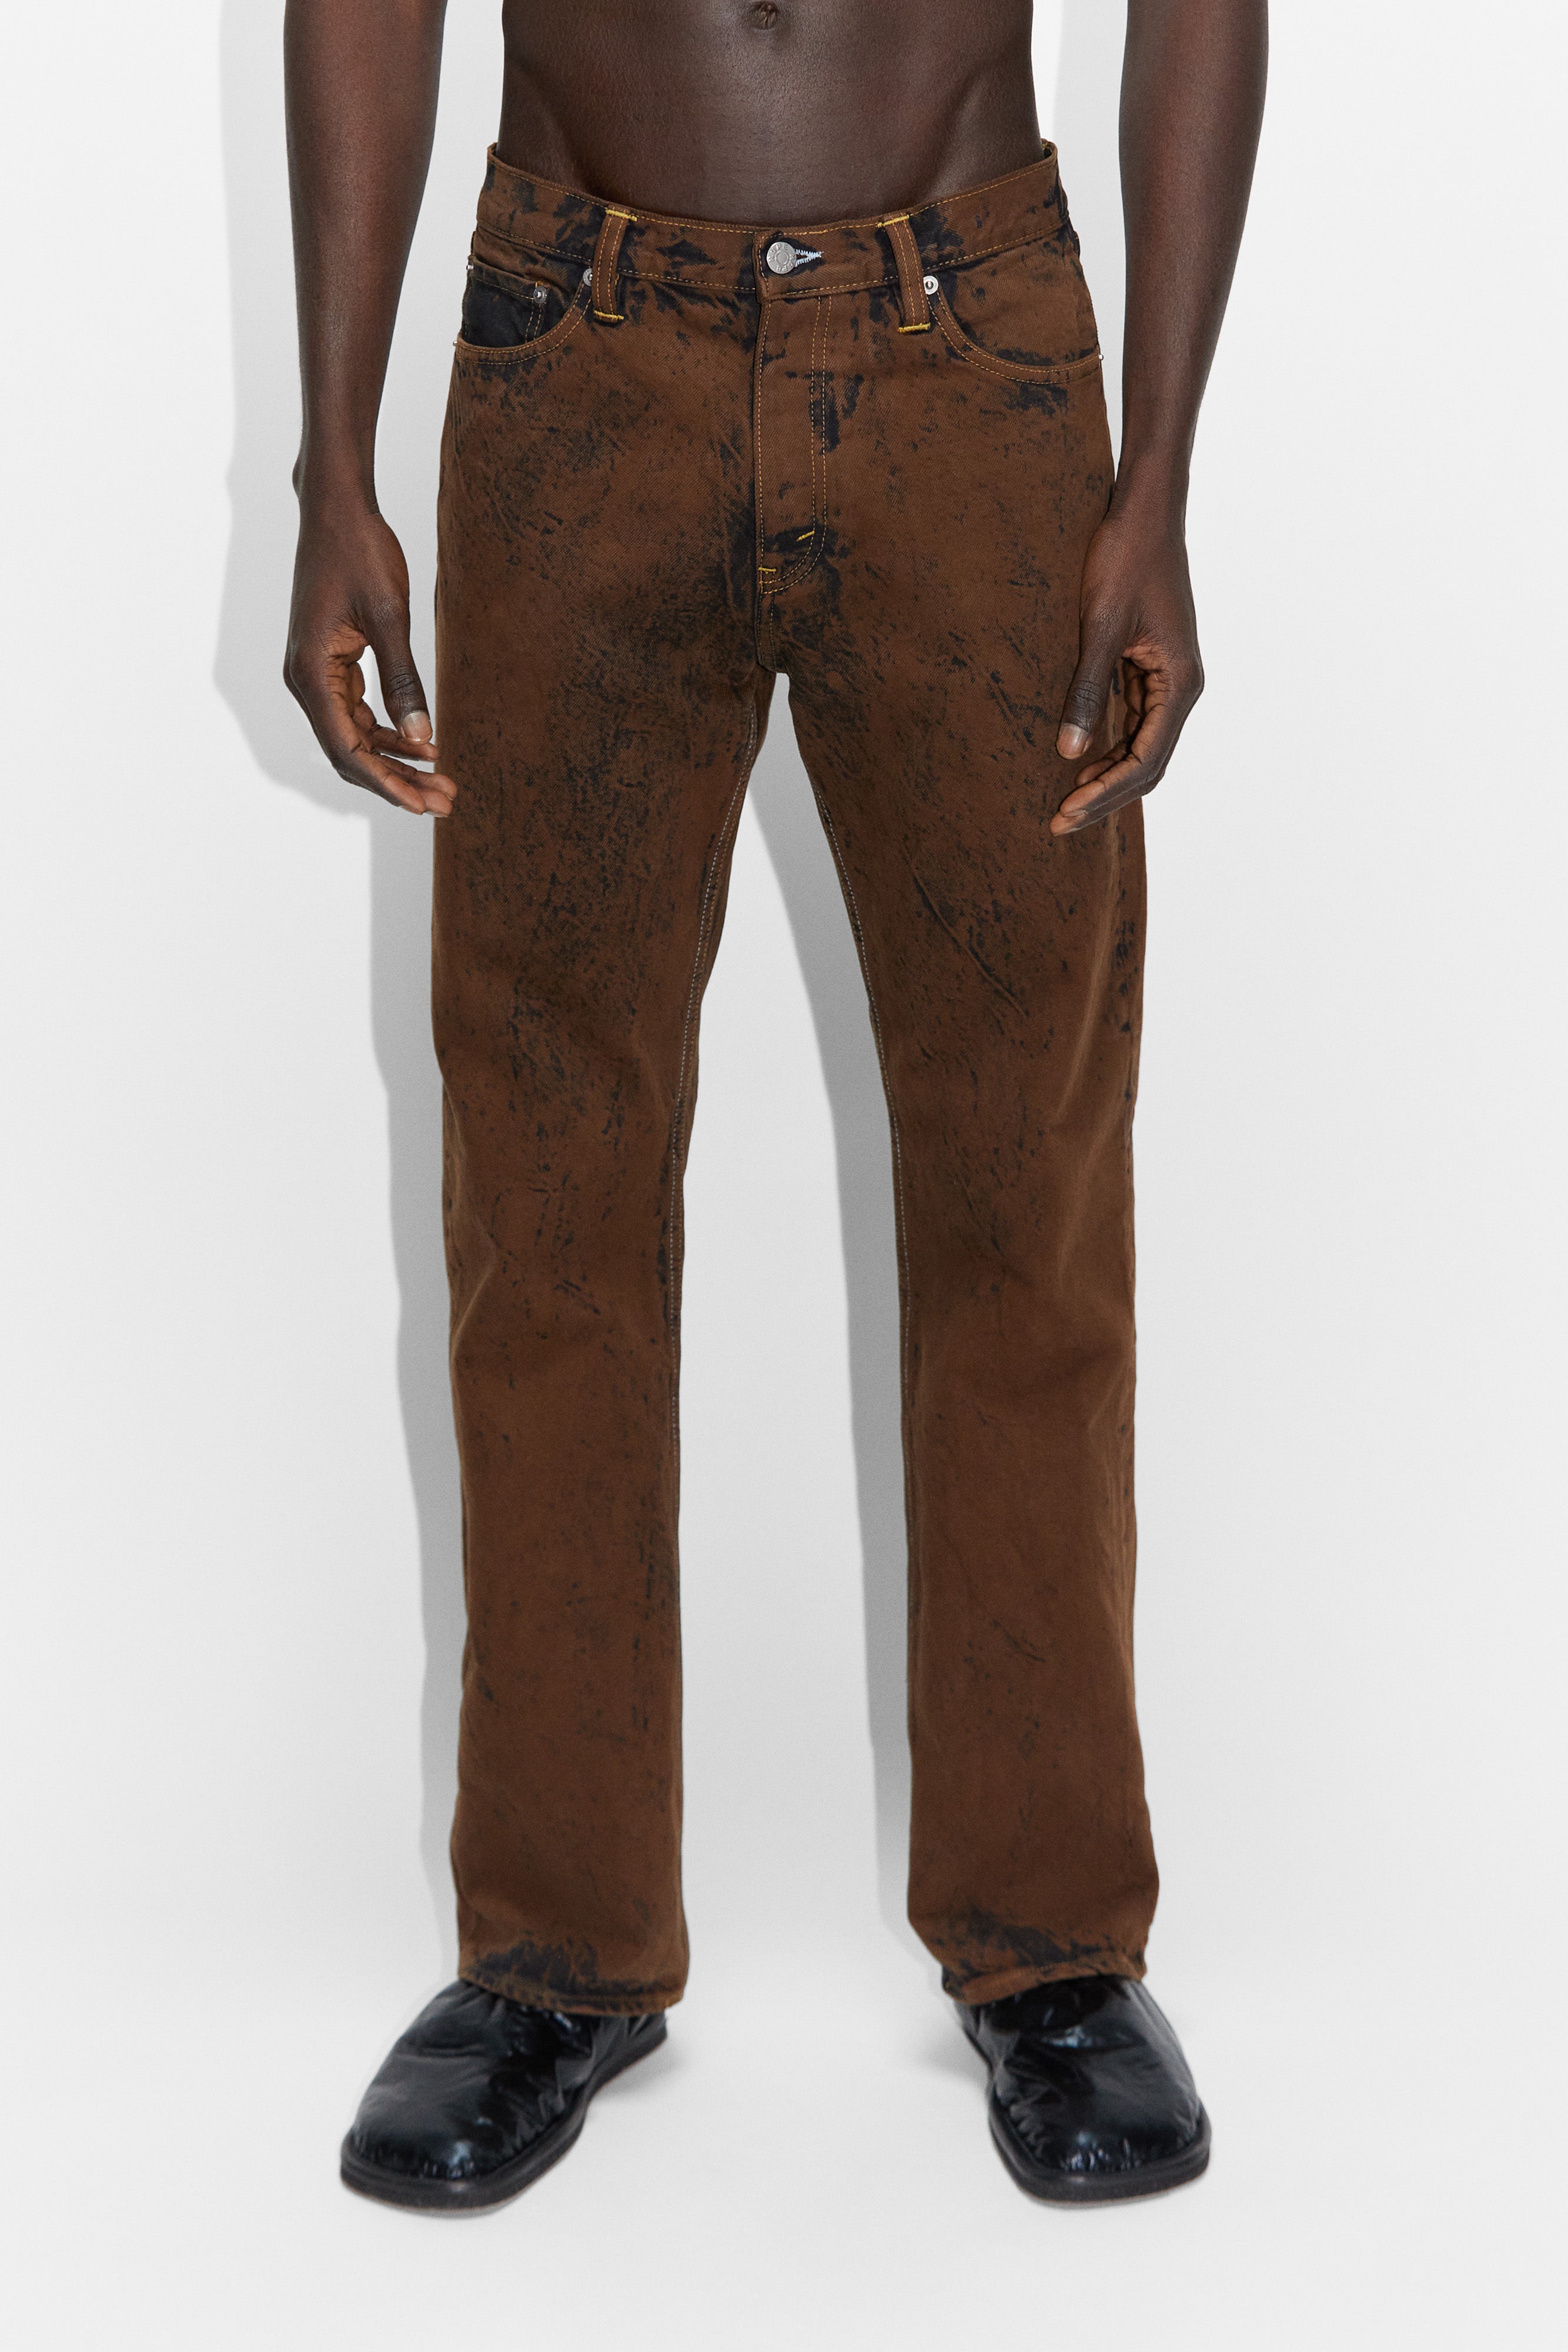 HOPE Relaxed Acid Jeans – in STHLM Rush Bootcut Brown -